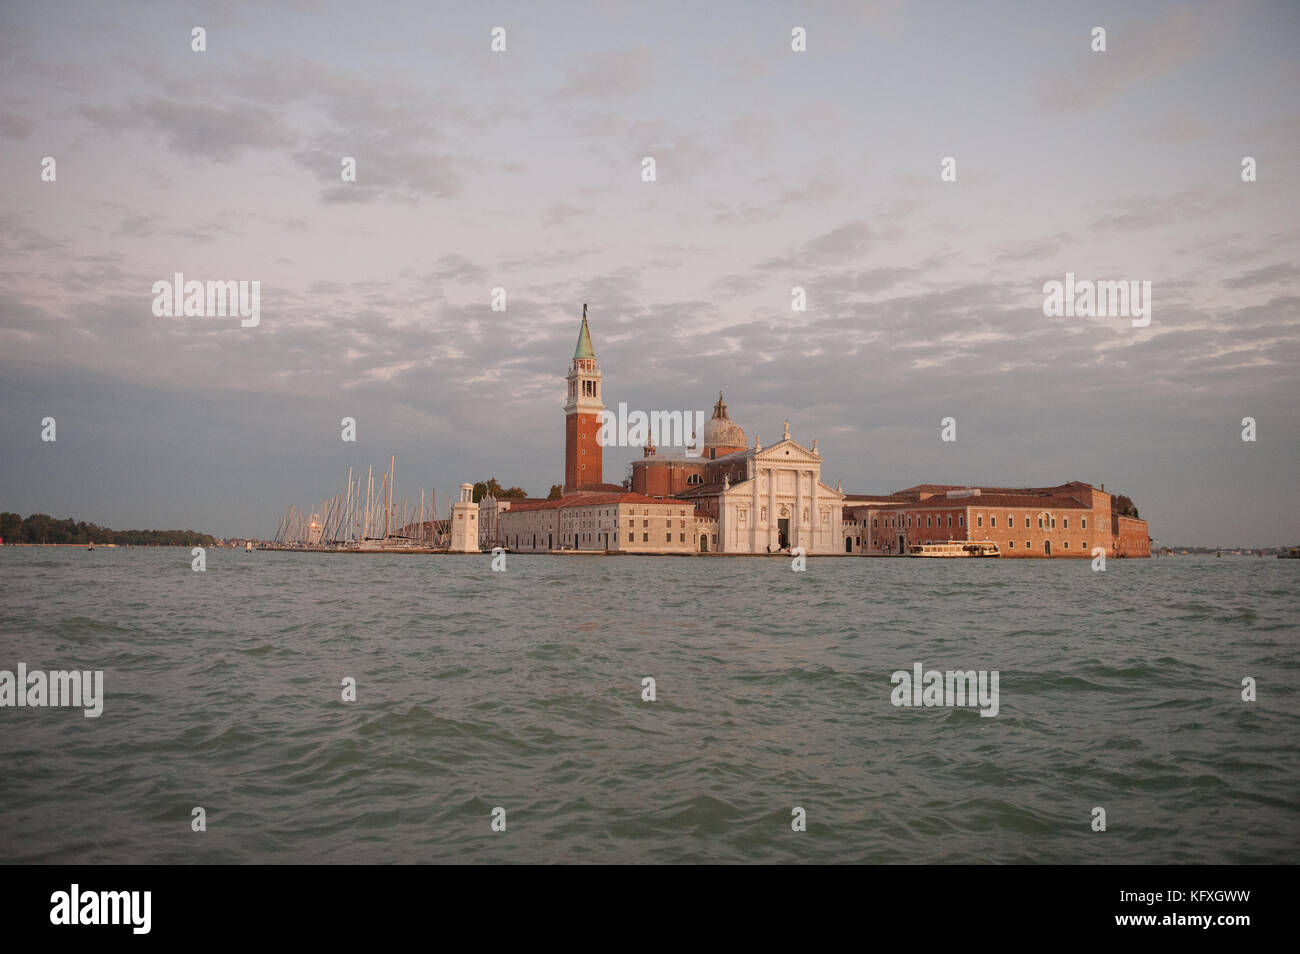 hi-res giorgio dusk - and stock images photography San Alamy maggiore at